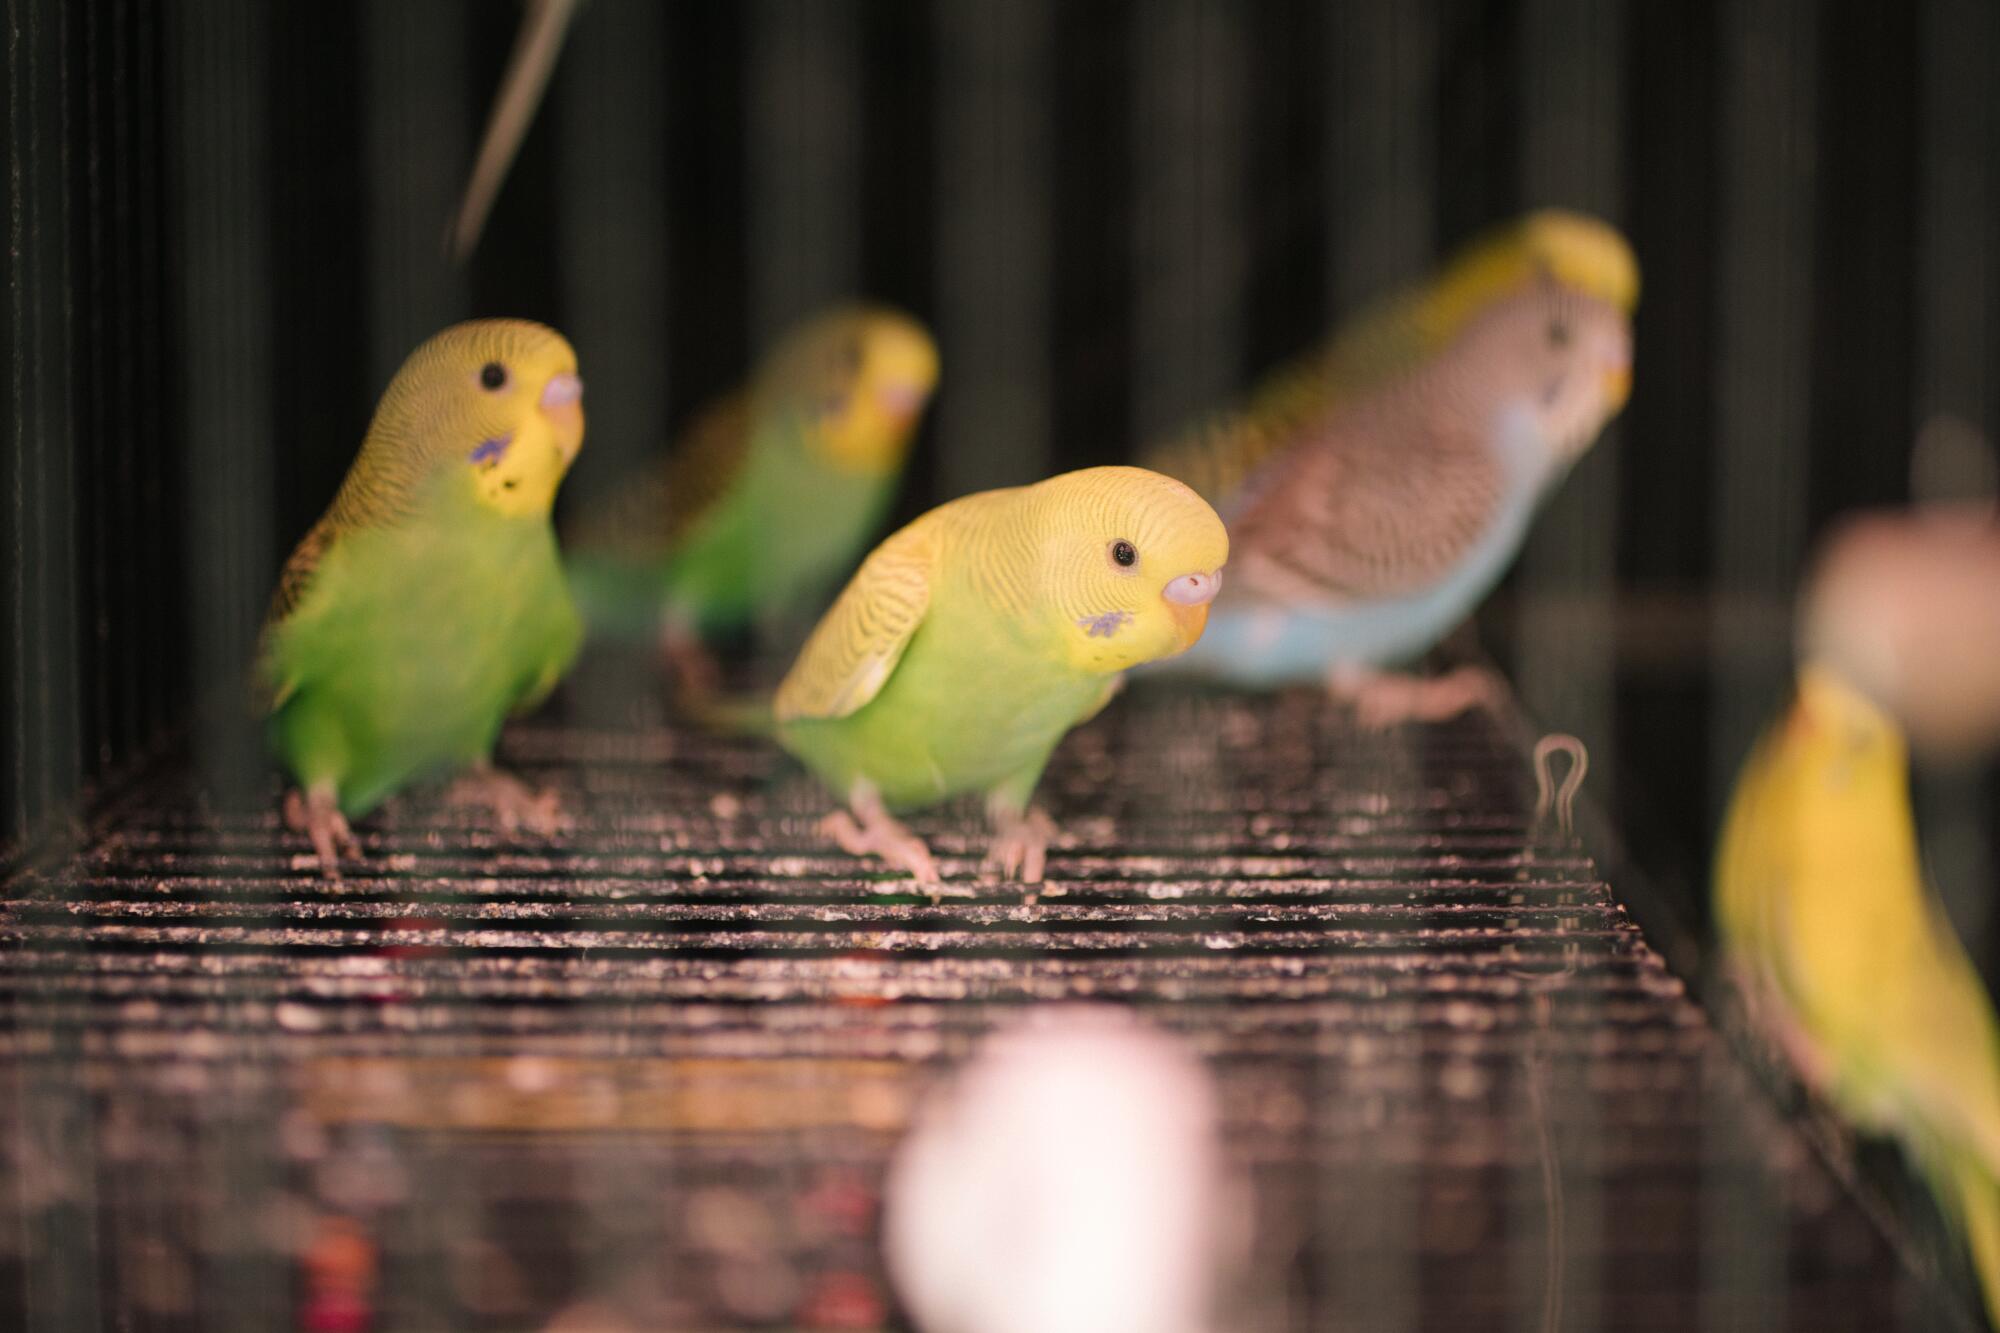 A handful of parakeets standing together inside a cage.